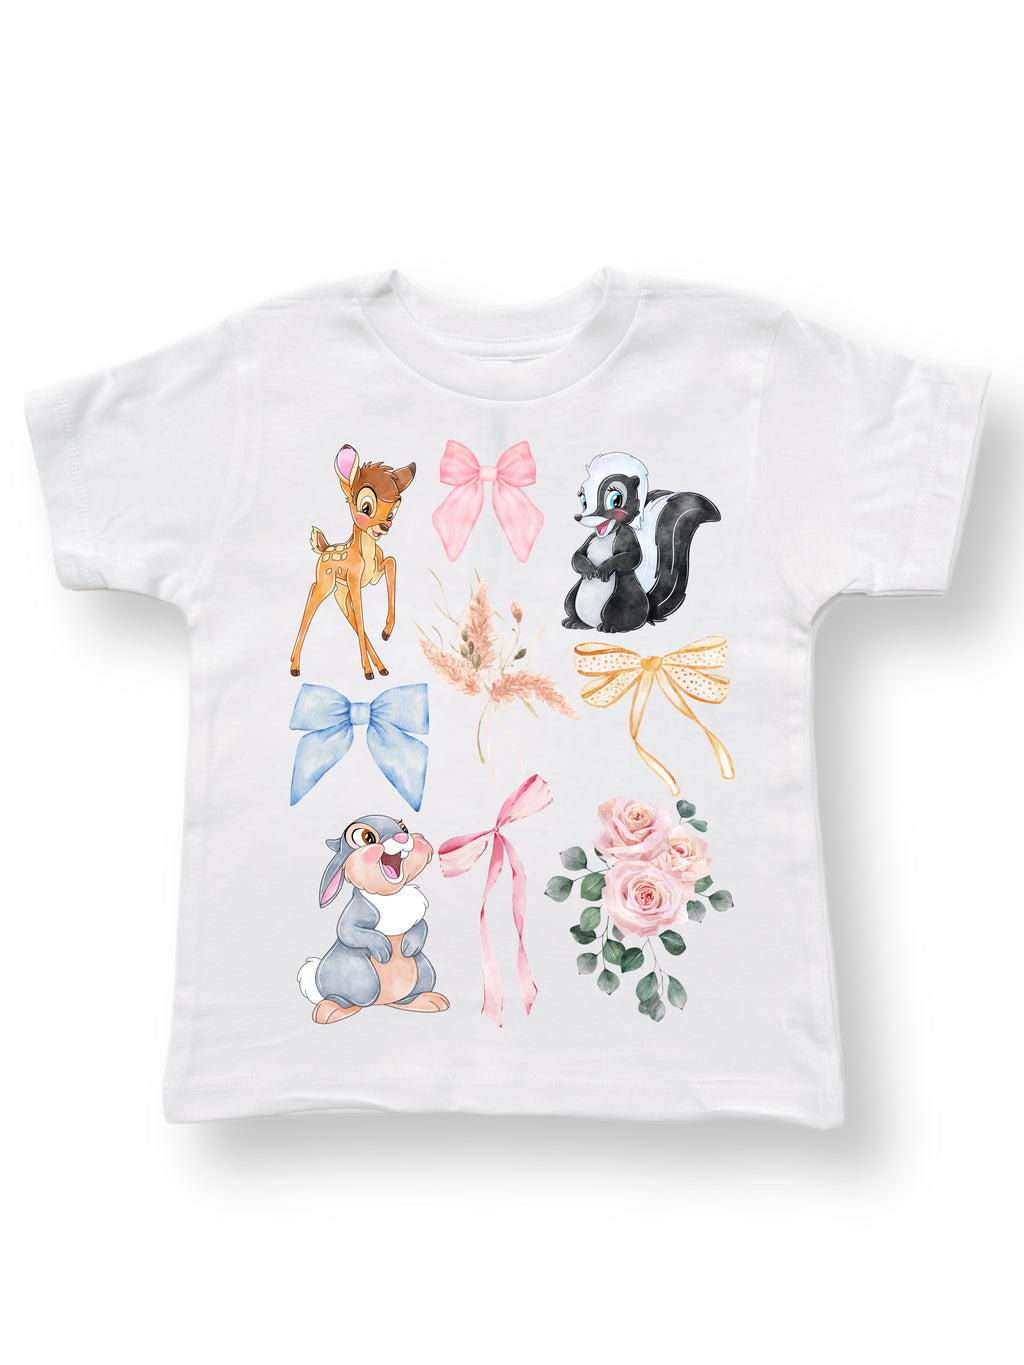 Favorite Things Tee- Fawn and Forest Friends